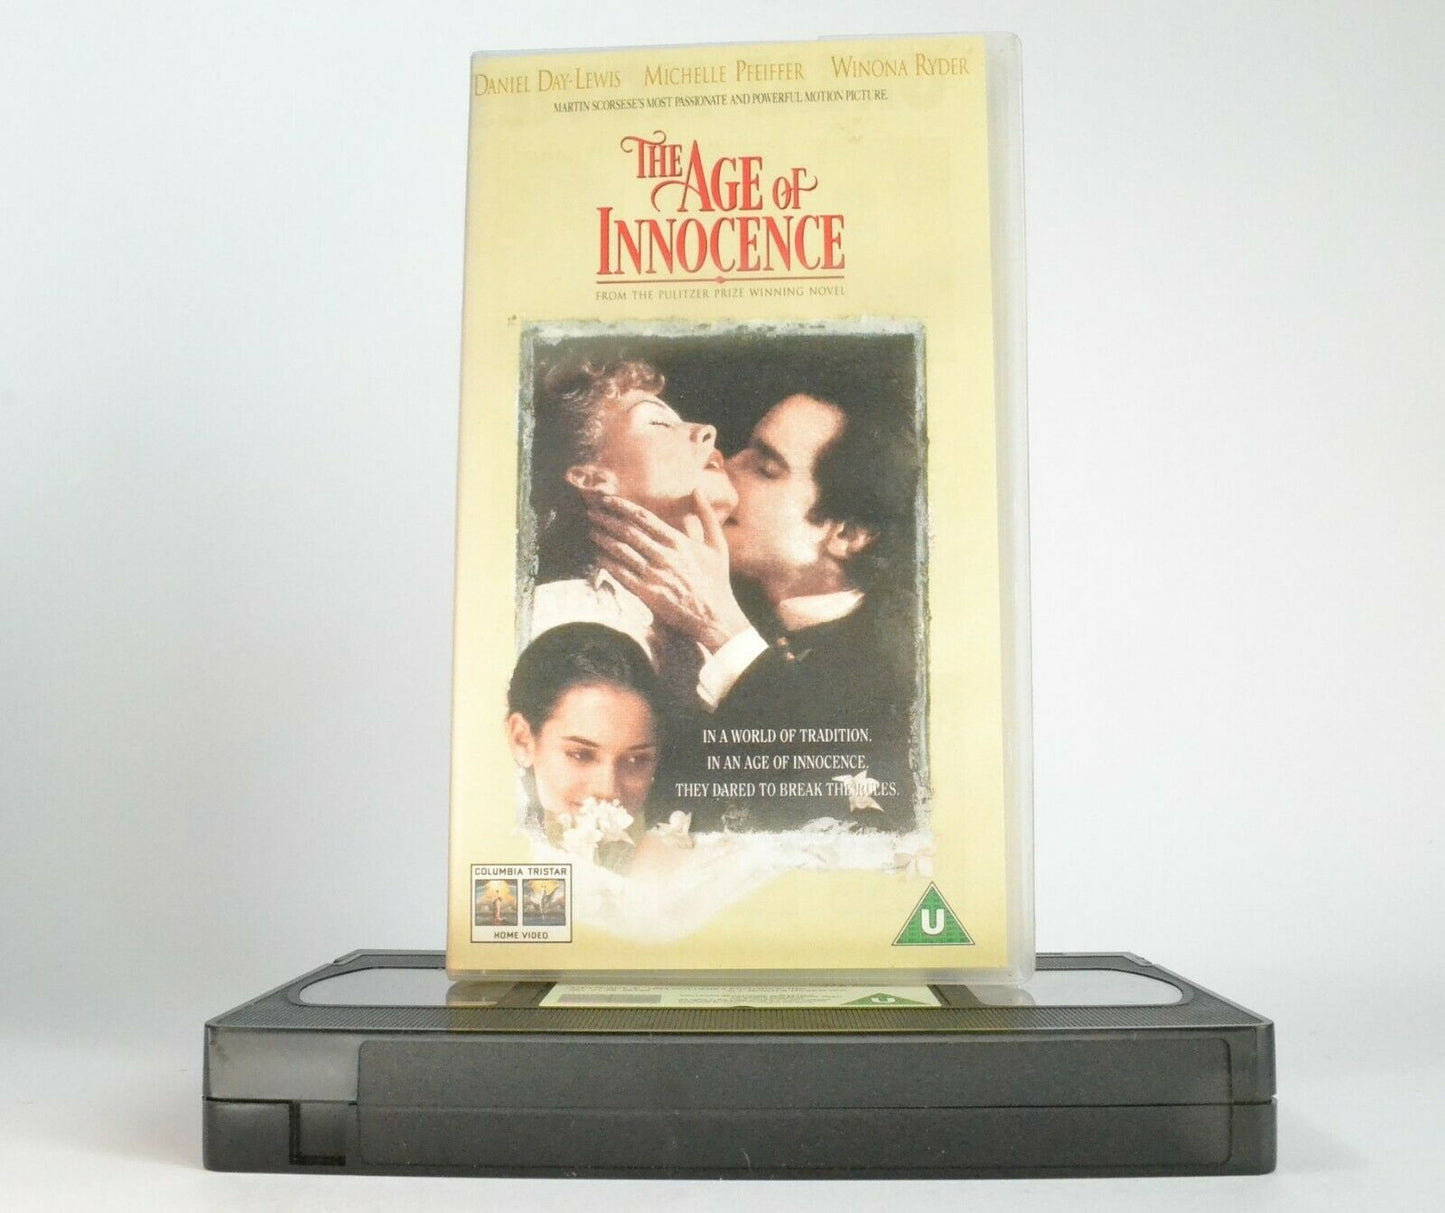 The Age Of Innocence: Romantic Drama - Daniel Day-Lewis/Michelle Pfeiffer - VHS-